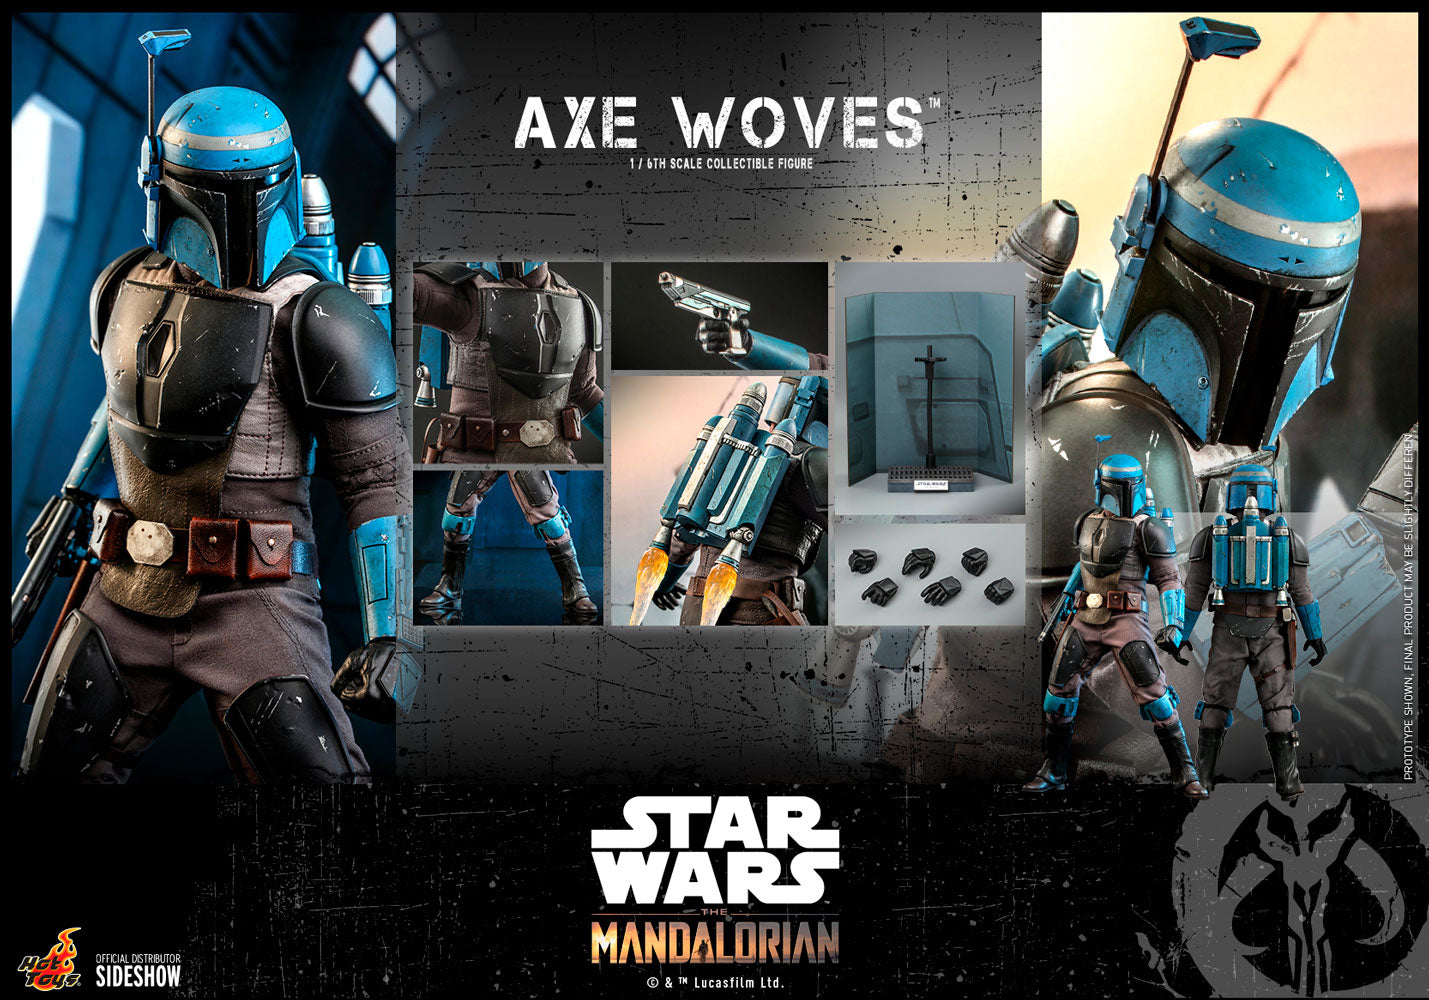 Hot Toys 1/6 Star Wars The Mandalorian 2 Axe Woves Sixth Scale Figure TMS070